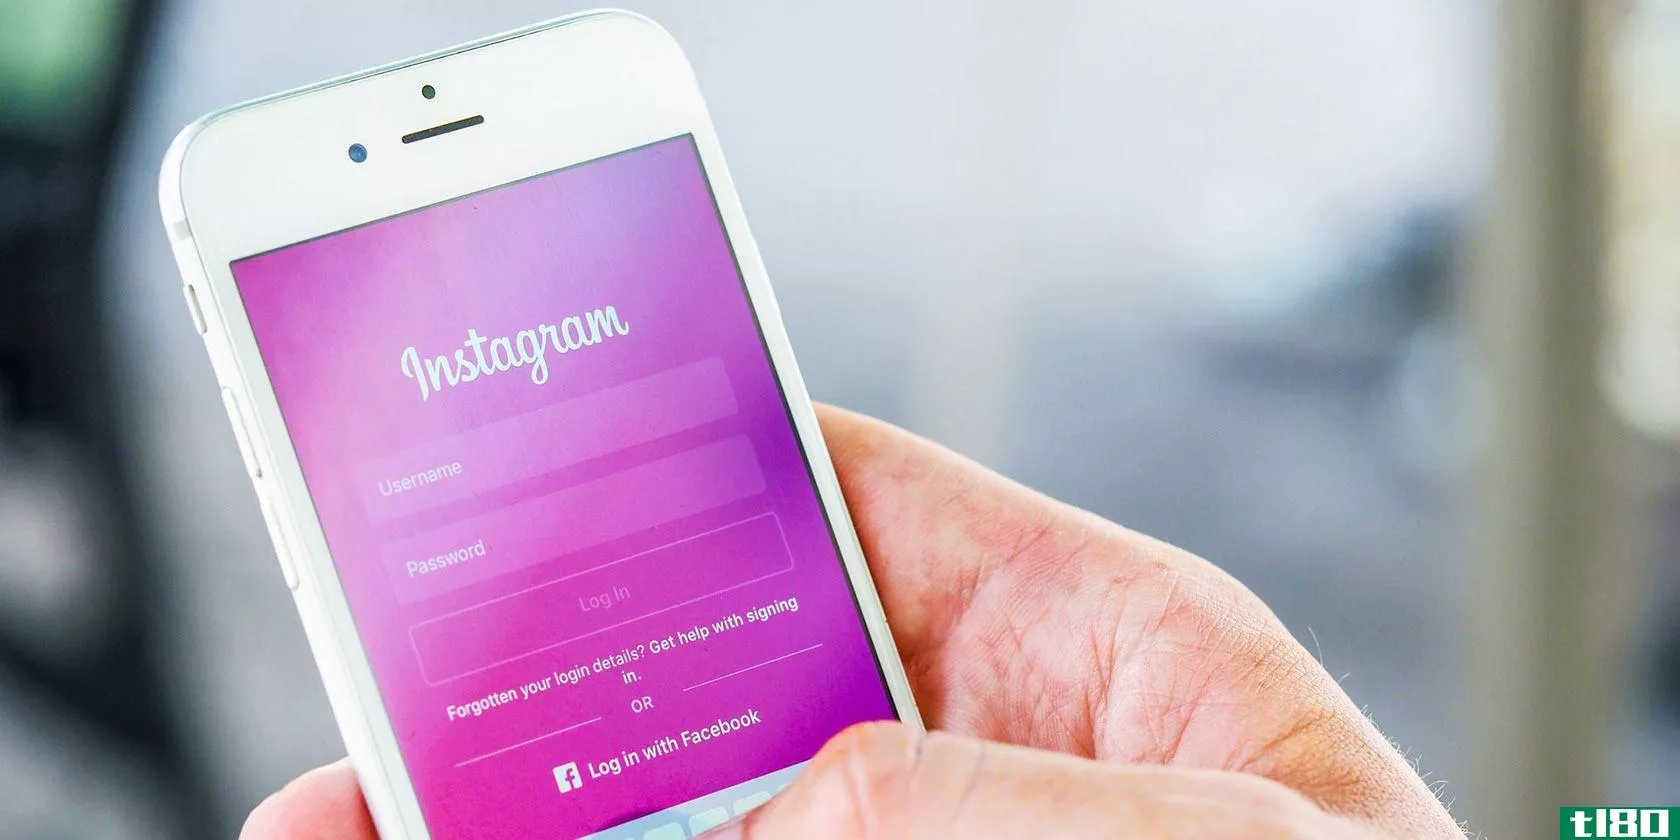 Instagram is bringing a Clubhouse compe*****